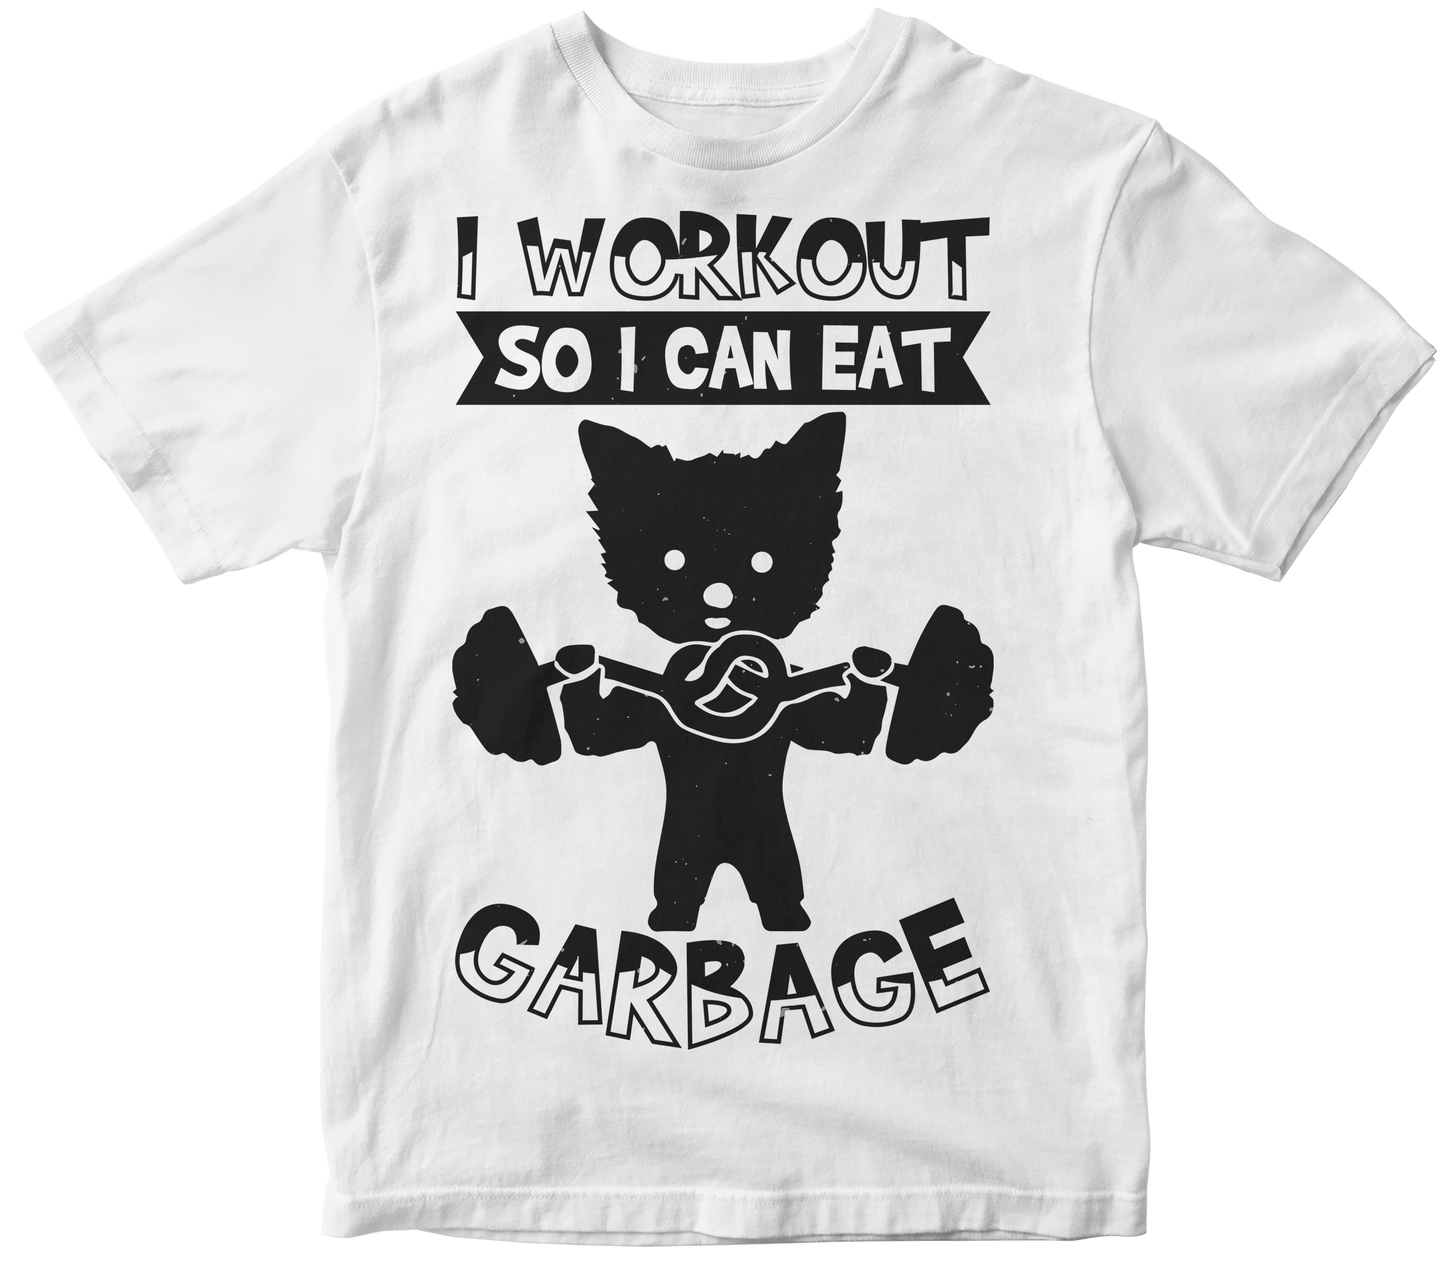 I workout so i can eat garbage